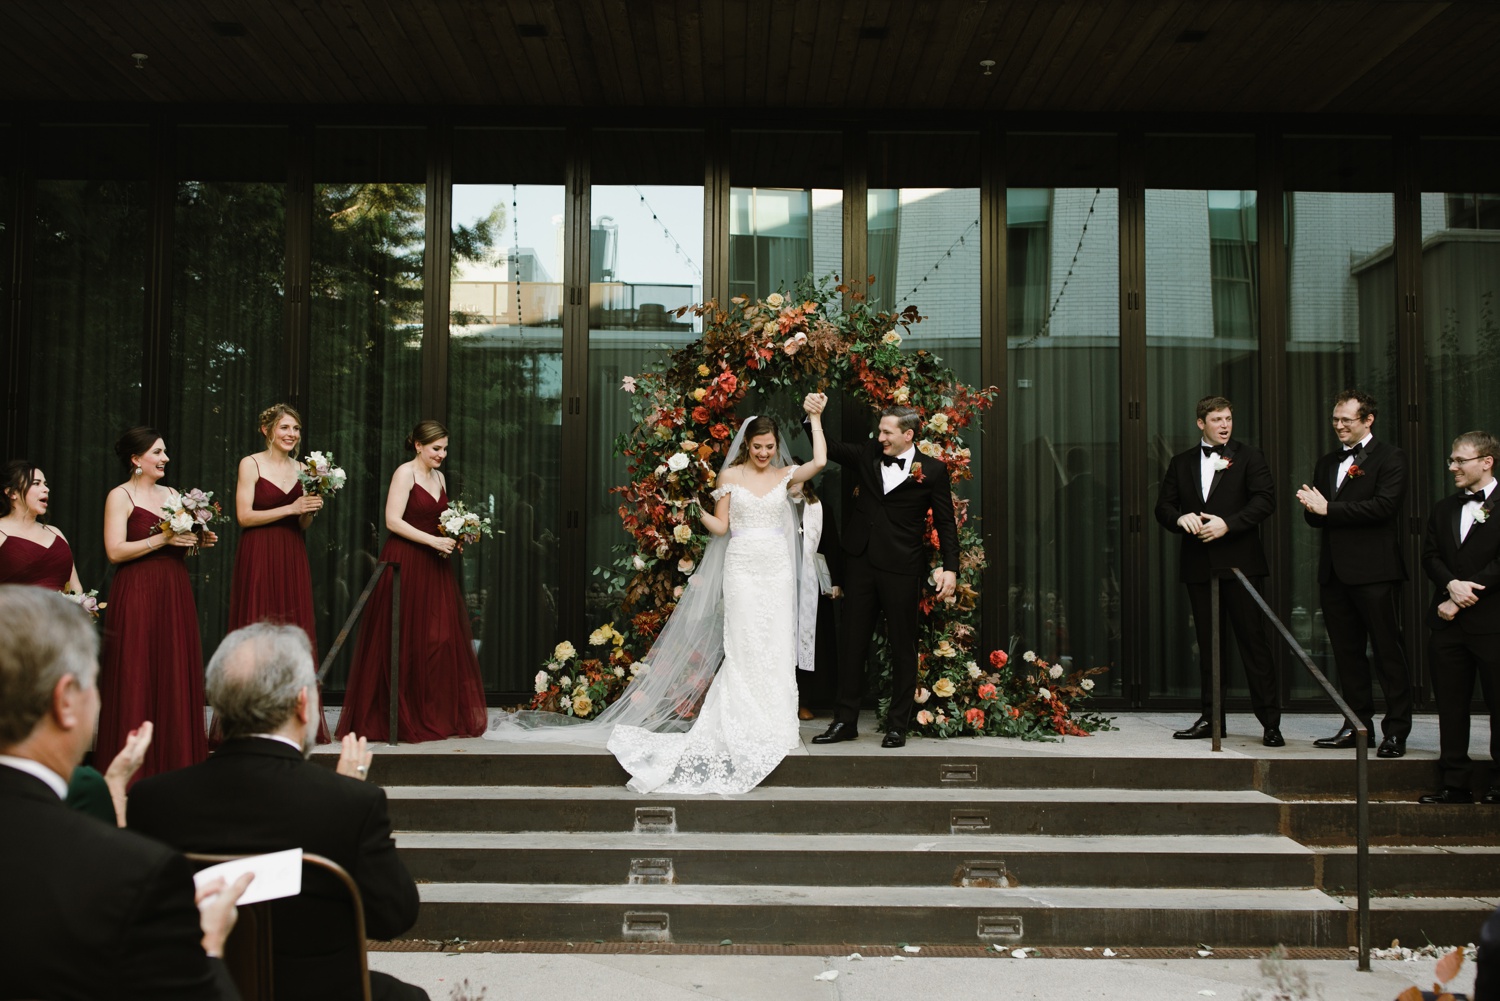 Outdoor ceremony for a fall wedding in Austin